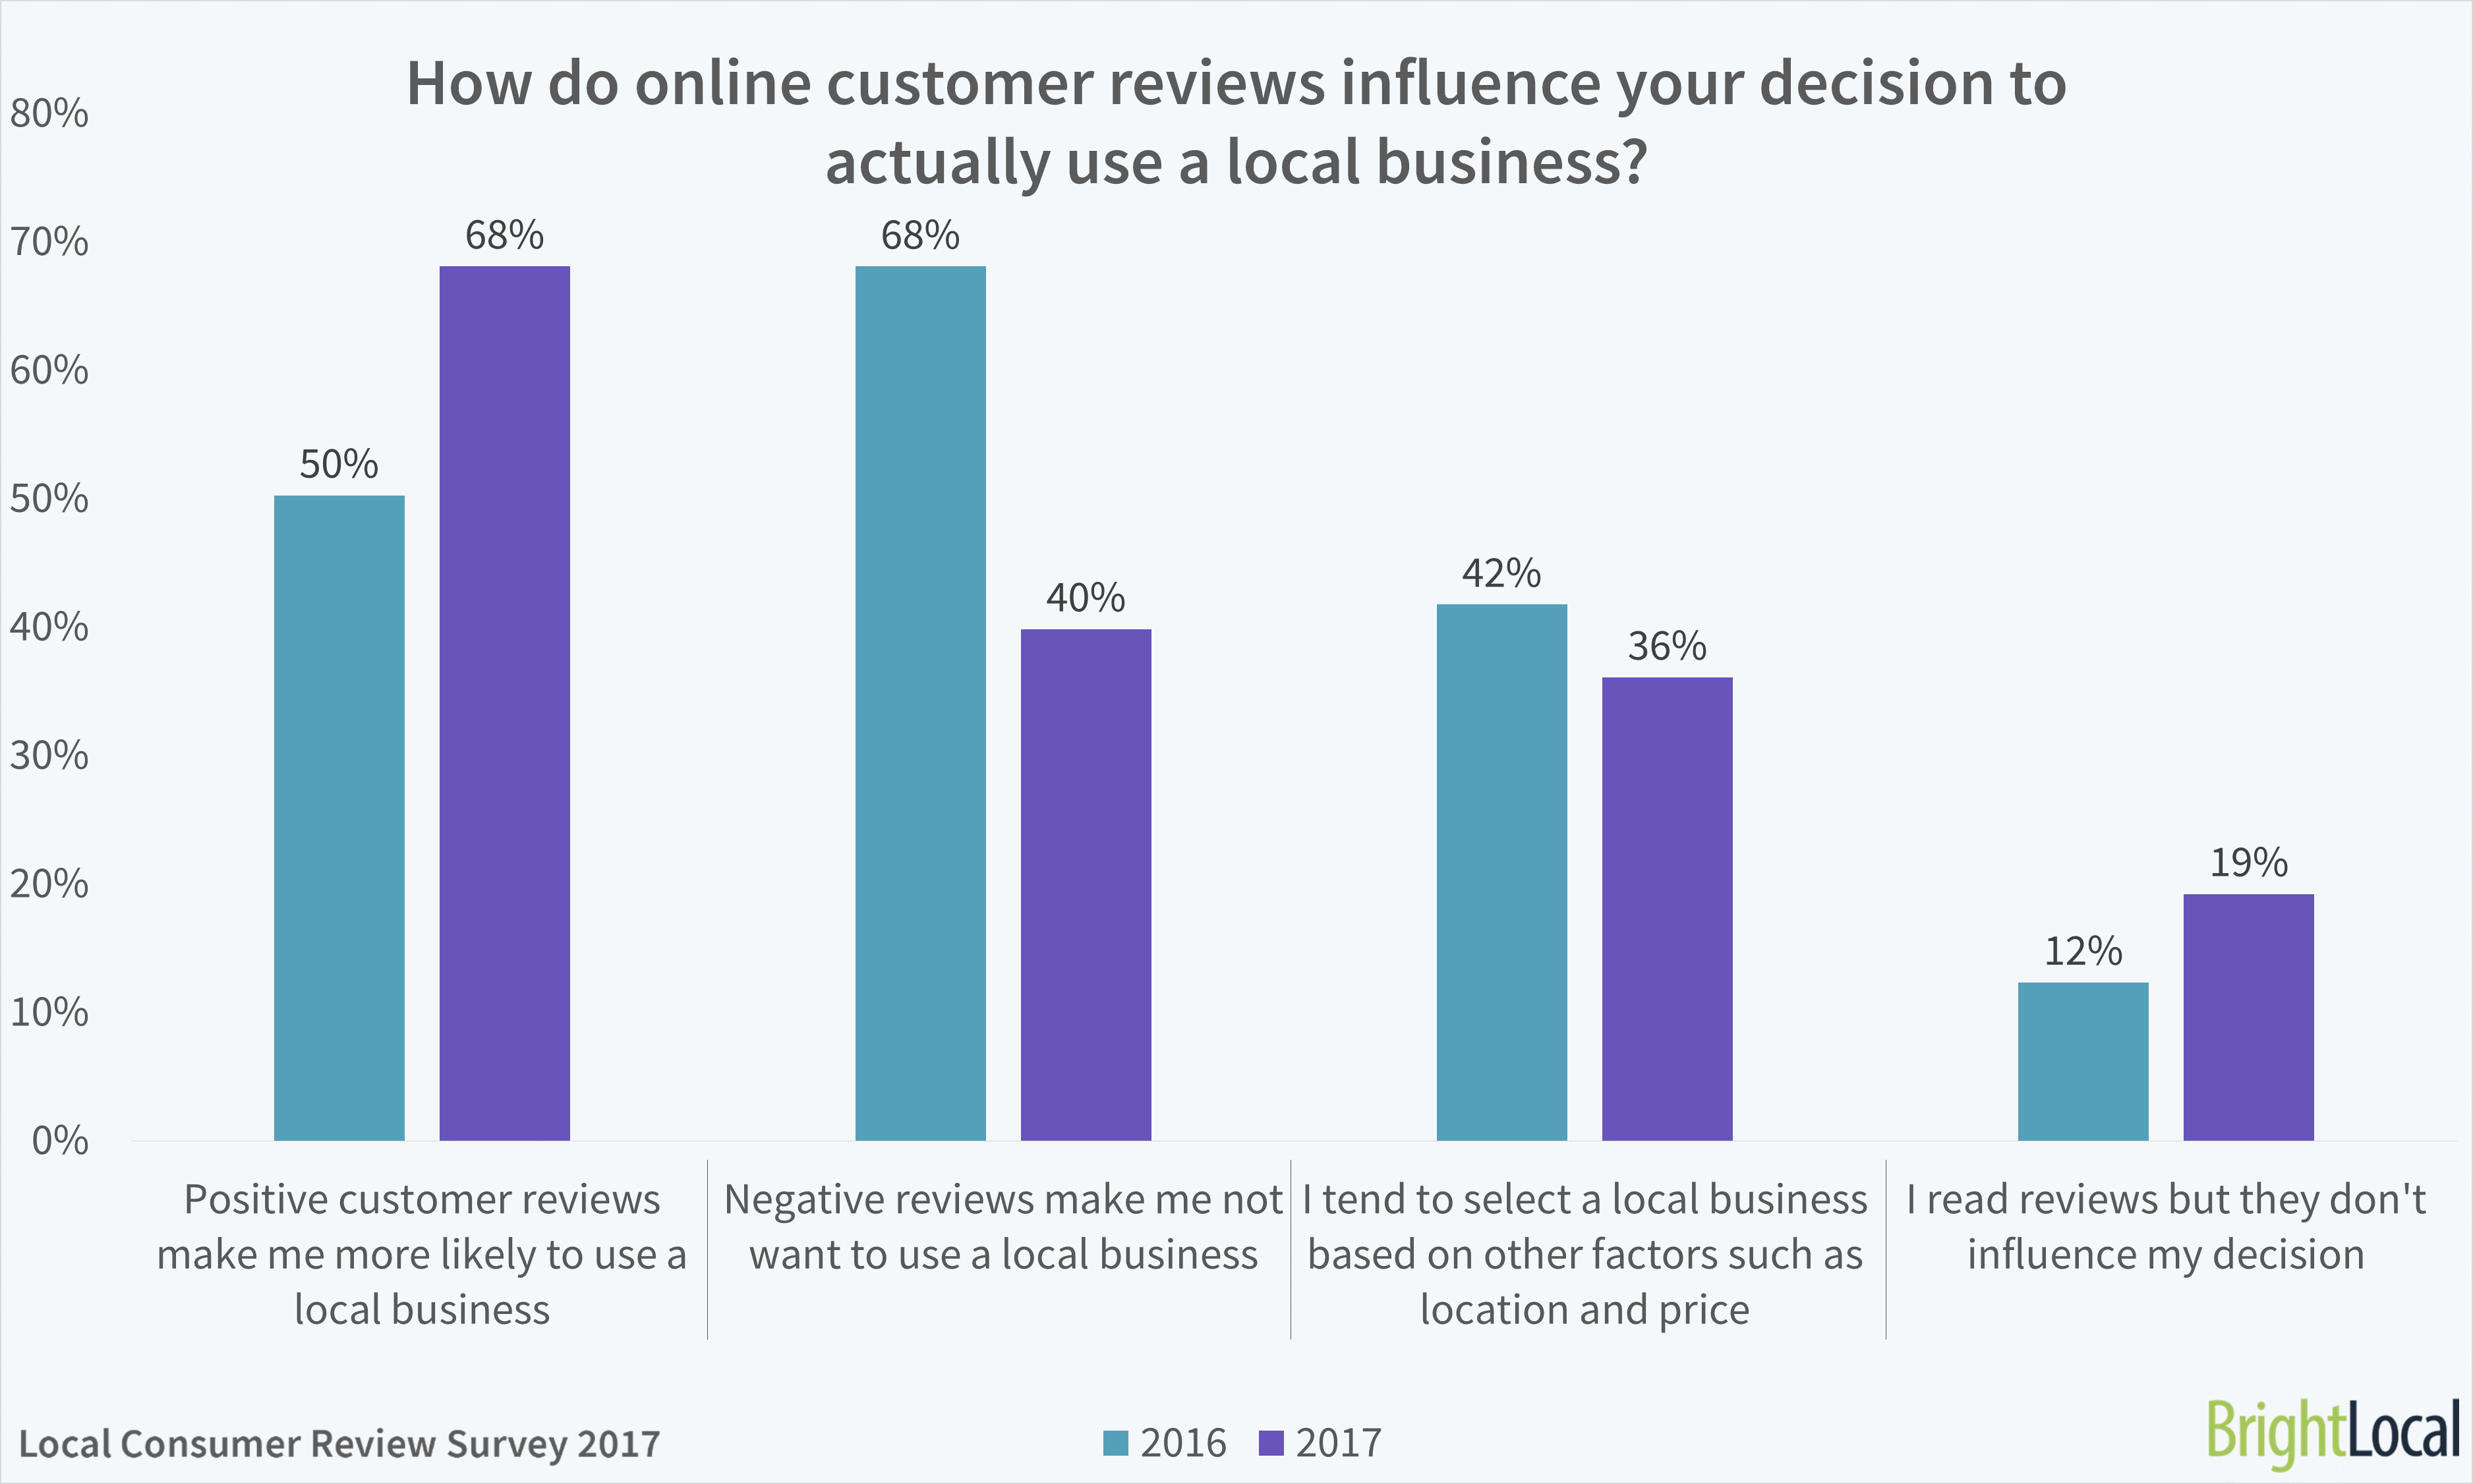 Positive reviews influence users to visit a local business